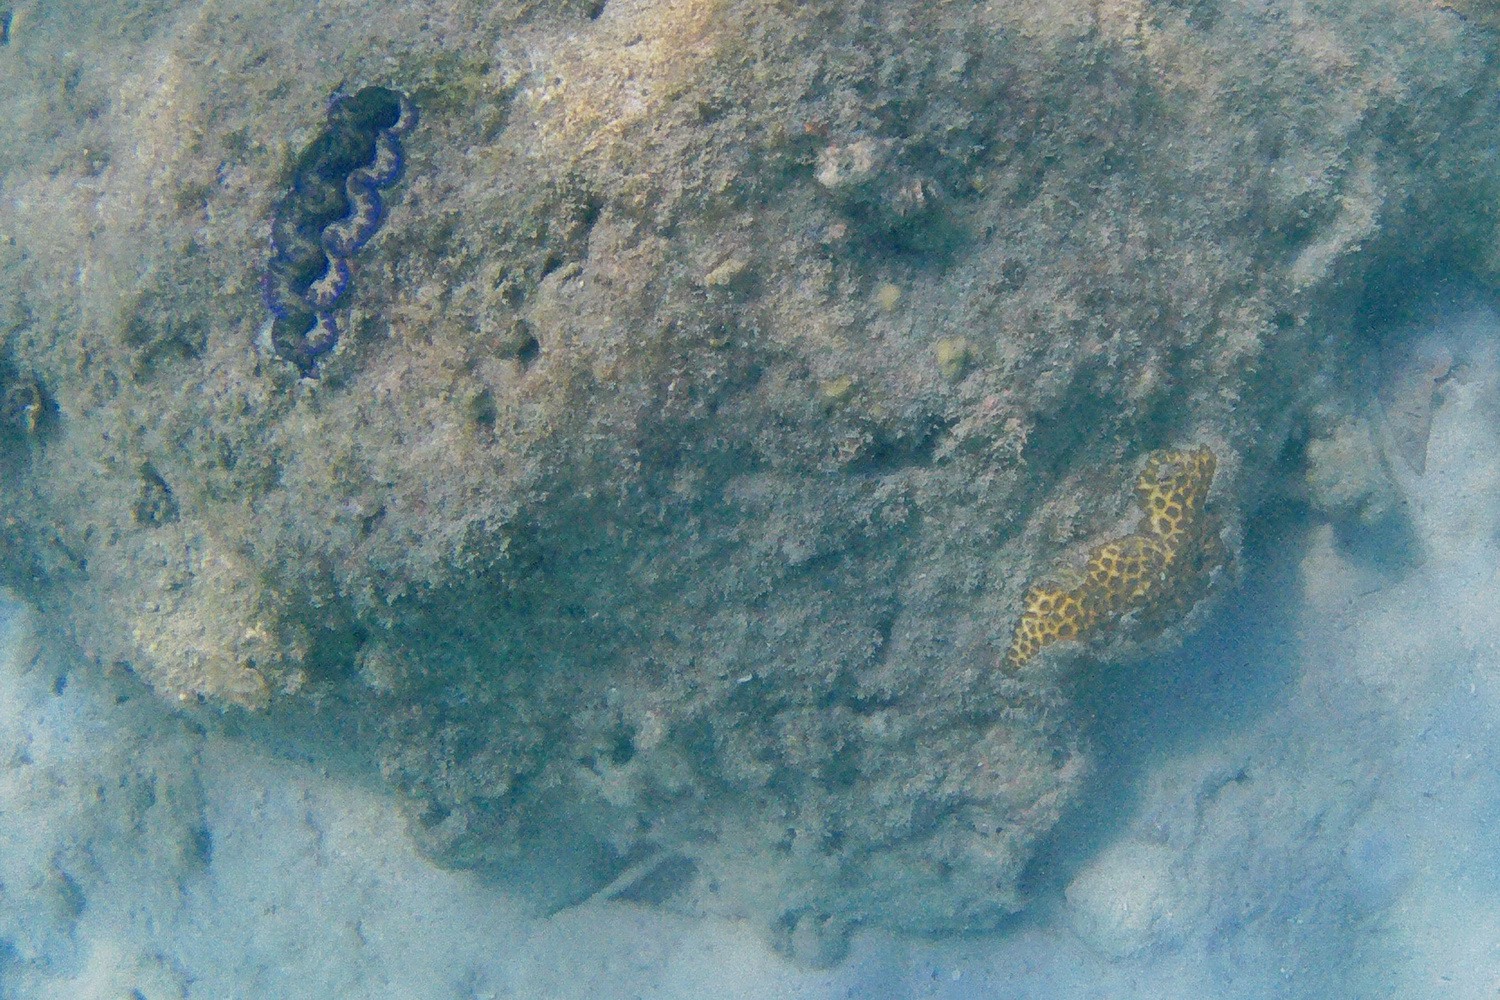 Purple clam in the sea around Koh Rong Sanloem